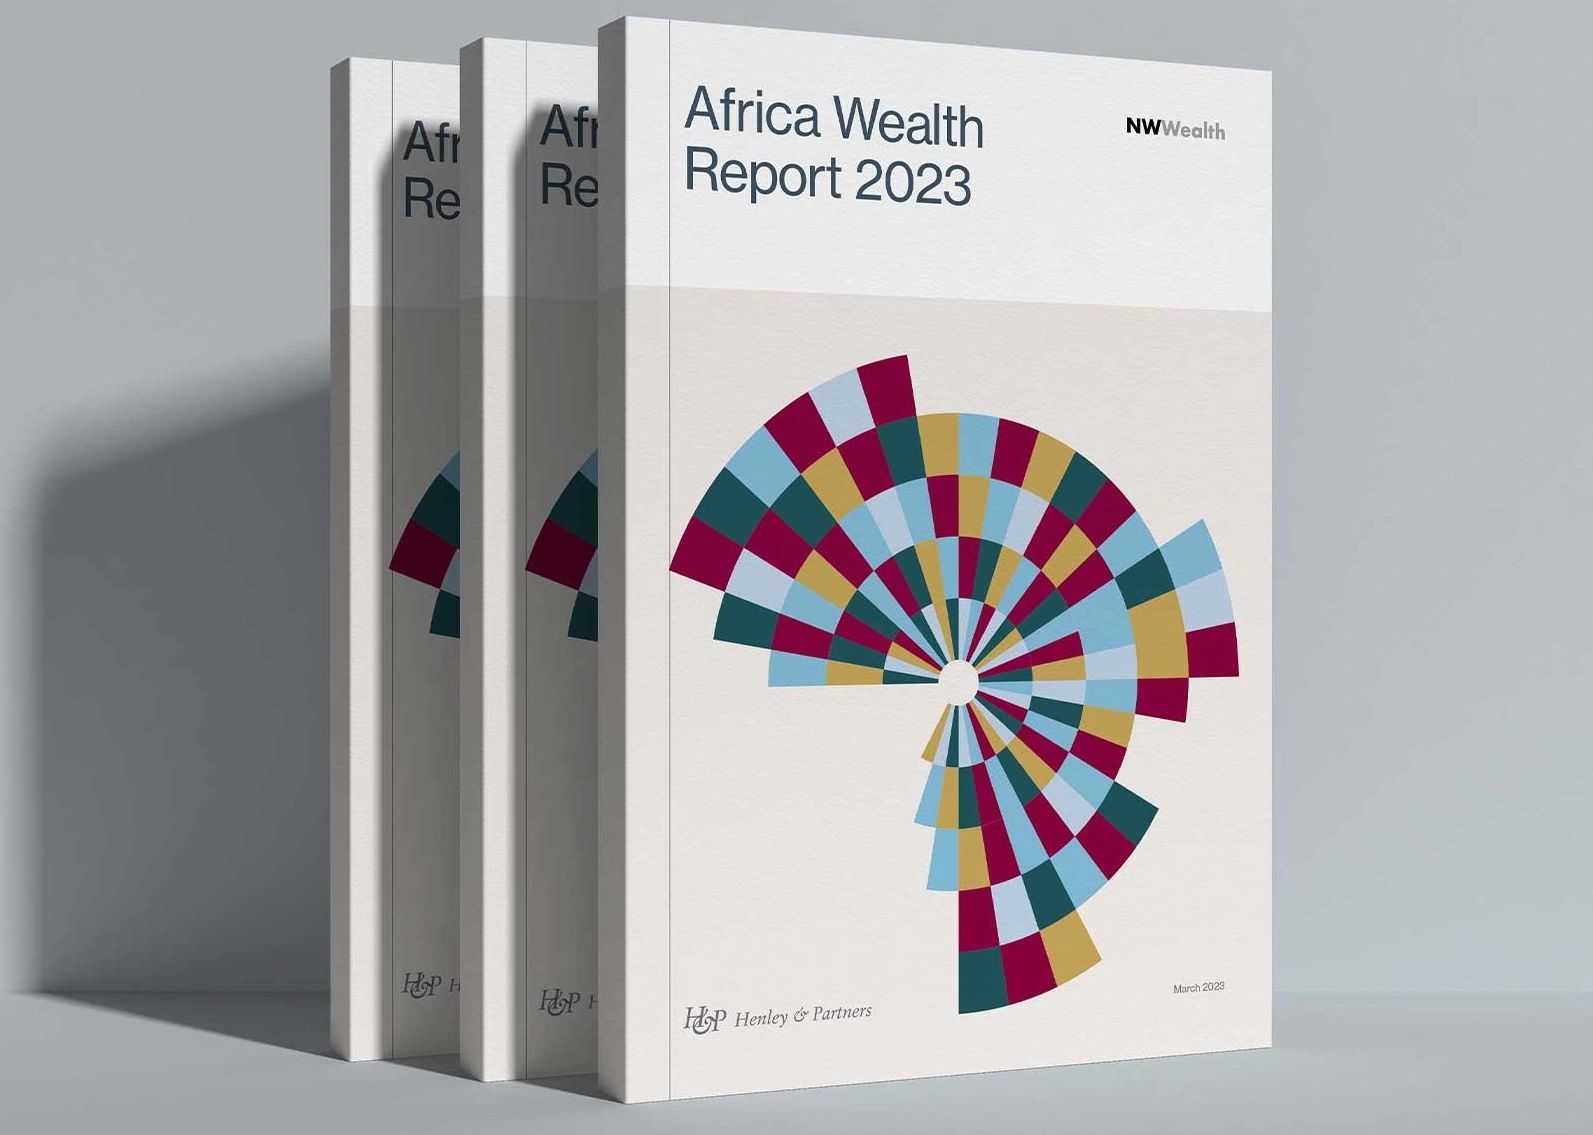 The Africa Wealth Report 2023